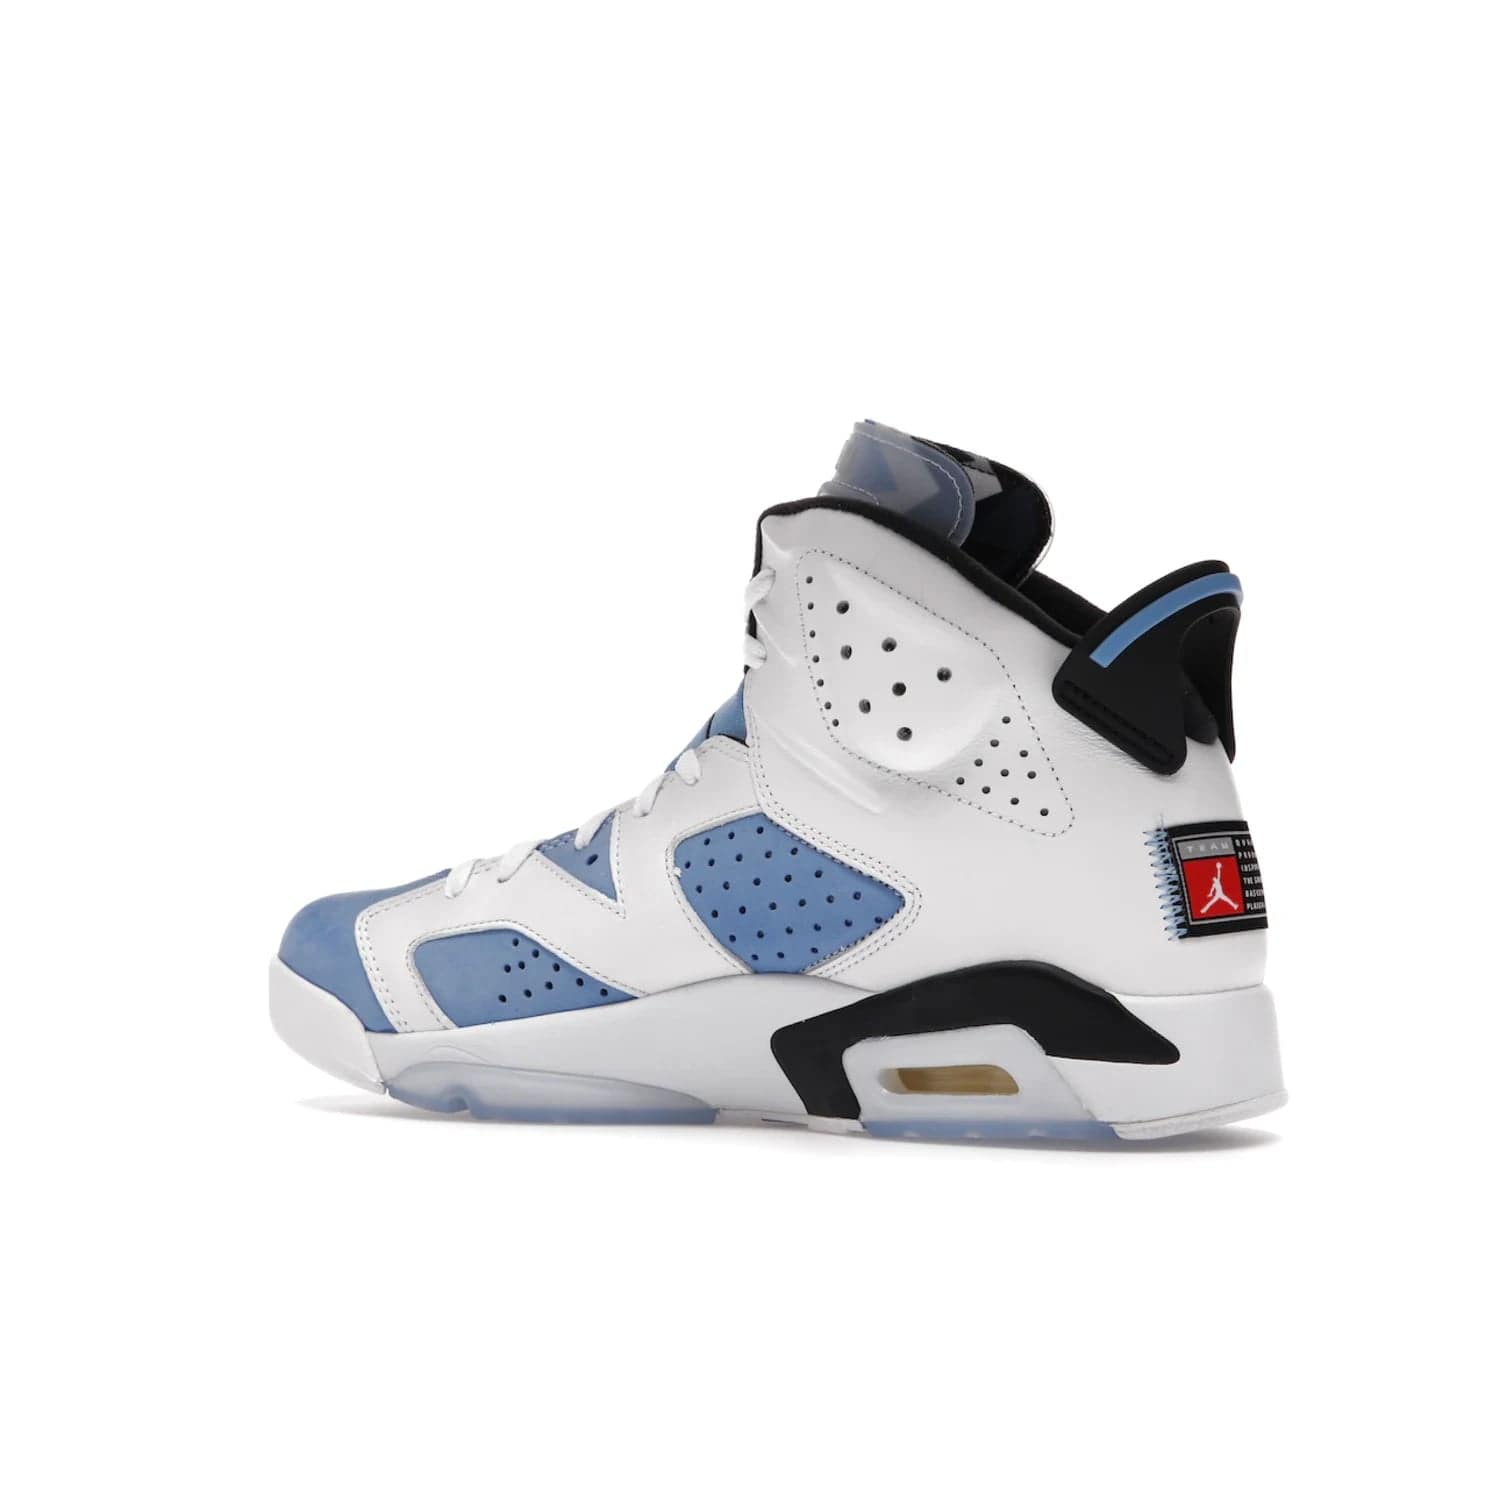 Jordan 6 Retro UNC White - Image 22 - Only at www.BallersClubKickz.com - Air Jordan 6 Retro UNC White with classic UNC colors brings nostalgia and style to a legendary silhouette. Celebrate MJ's alma mater with navy blue accents, icy semi-translucent sole and Jordan Team patch. Out March 2022 for the Sneaker Enthusiast.